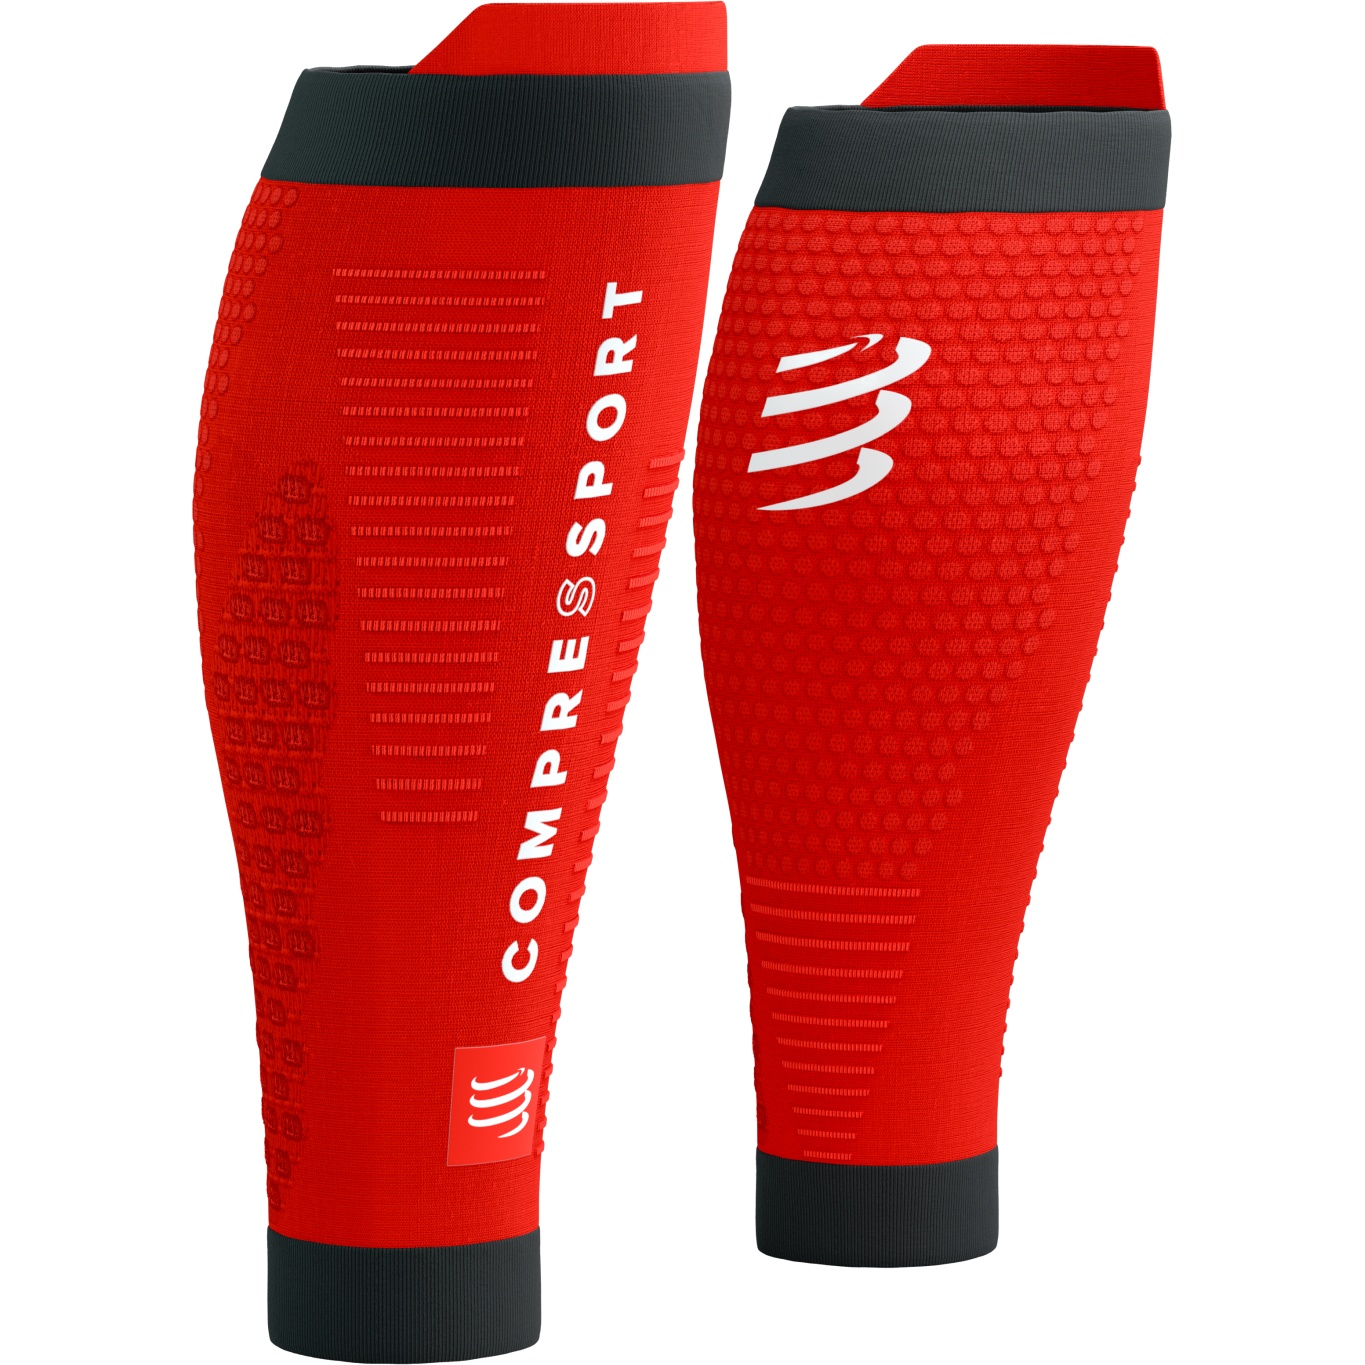 Picture of Compressport R2 3.0 Compression Calf Sleeves - red/black